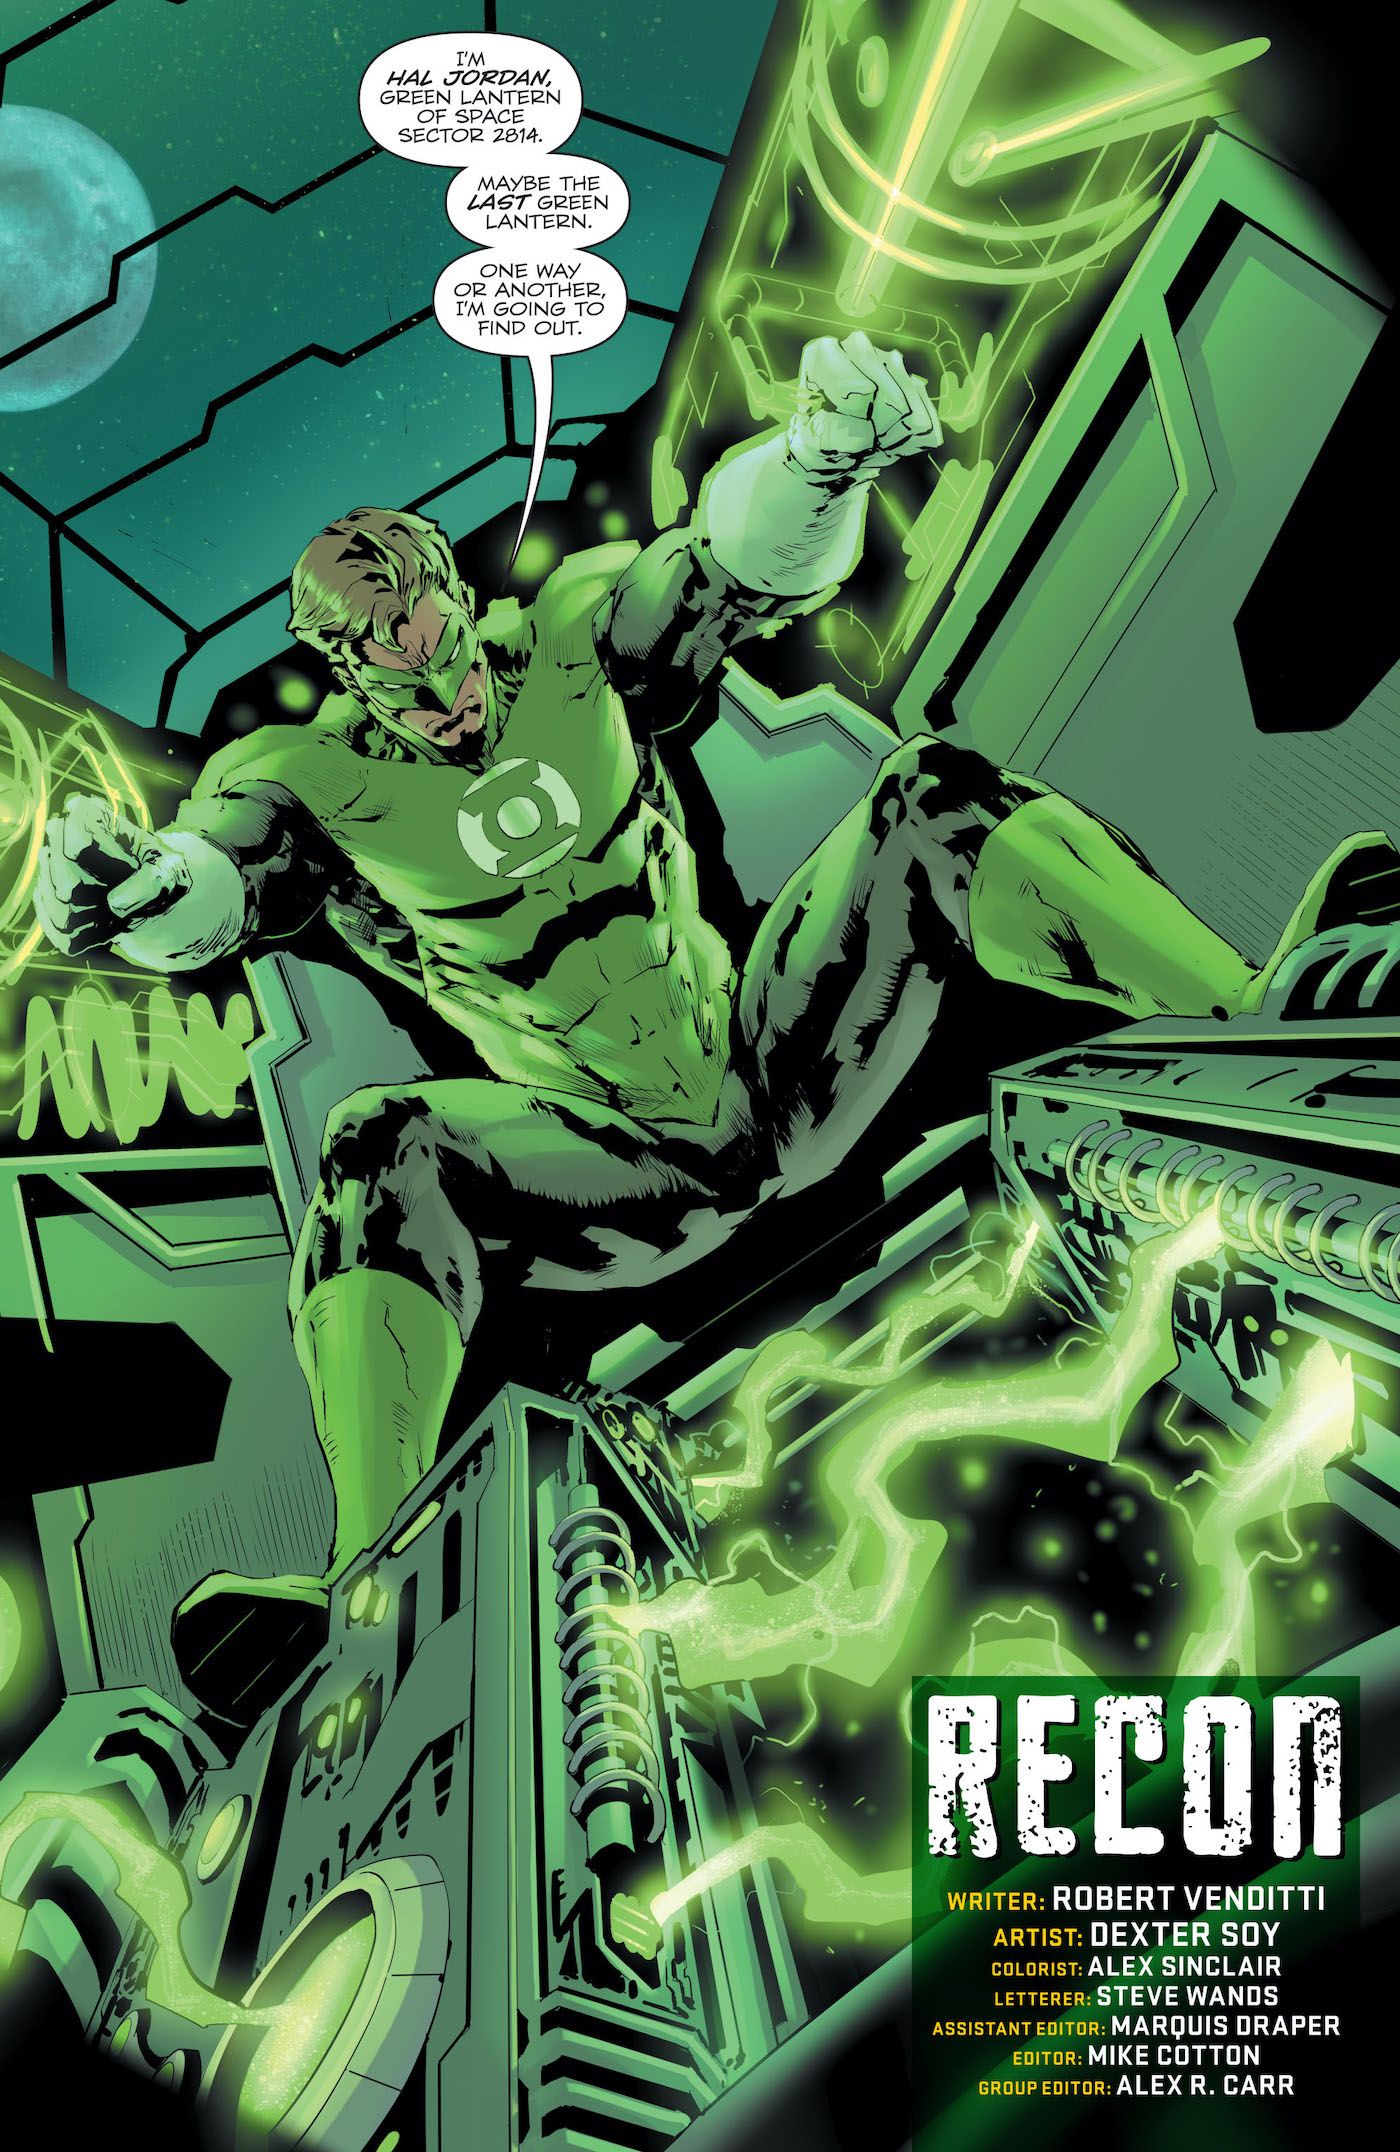 Green Lantern Just Got A Huge Power-Up Thanks To Cyborg